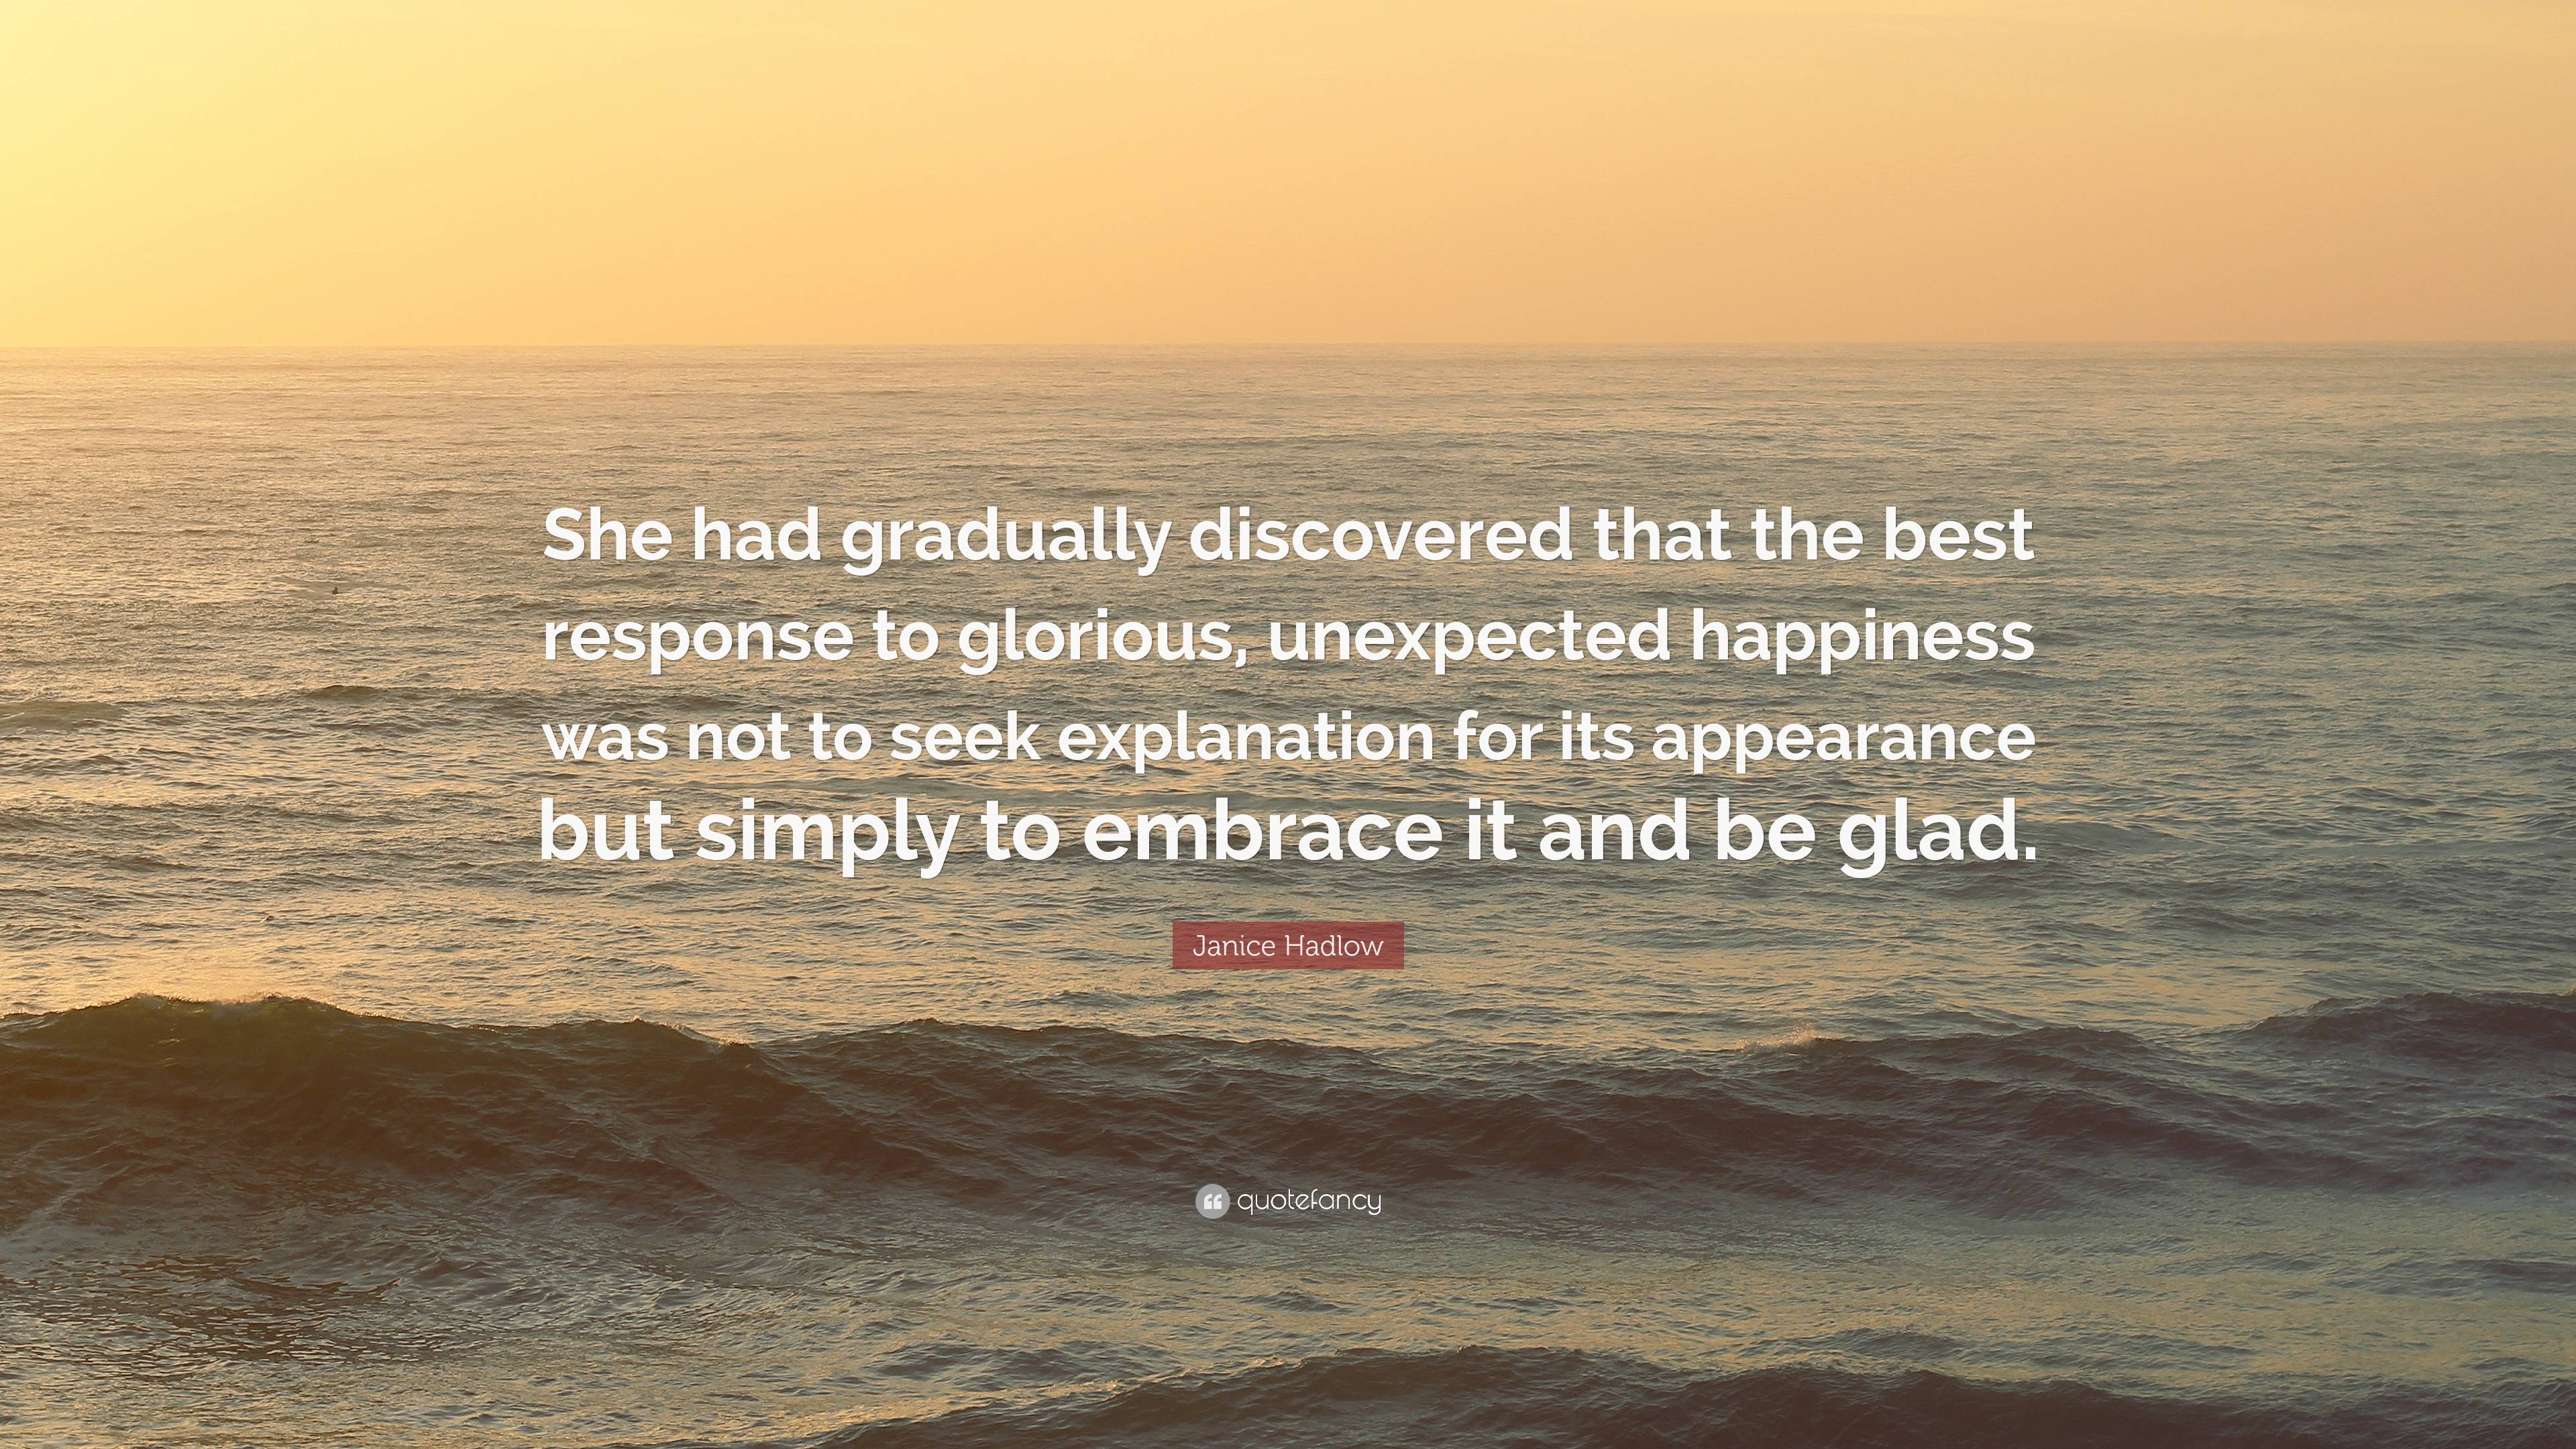 Janice Hadlow Quote: “She had gradually discovered that the best ...